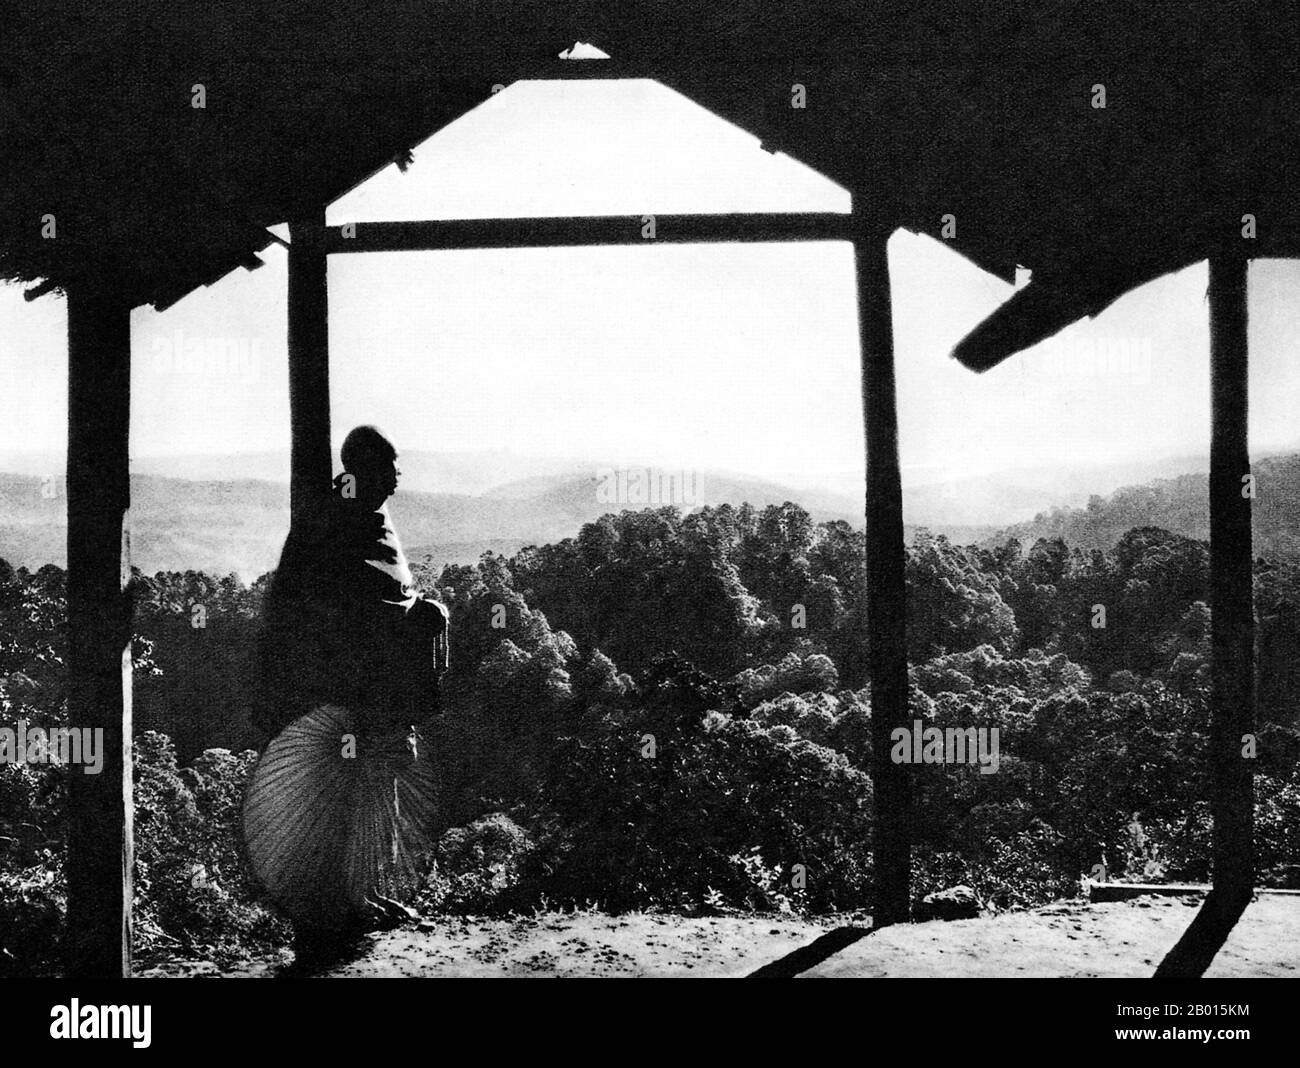 Burma/Myanmar: A Buddhist monk looks out over the mountains in Kalaw, Shan State, c. 1920s.  Kalaw is a hill town in southwestern Shan State, northern Burma, that was a popular retreat for British officers during colonial rule.  The British conquest of Burma began in 1824 in response to a Burmese attempt to invade India. By 1886, and after two further wars, Britain had incorporated the entire country into the British Raj.  To stimulate trade and facilitate changes, the British brought in Indians and Chinese, who quickly displaced the Burmese in urban areas. Stock Photo